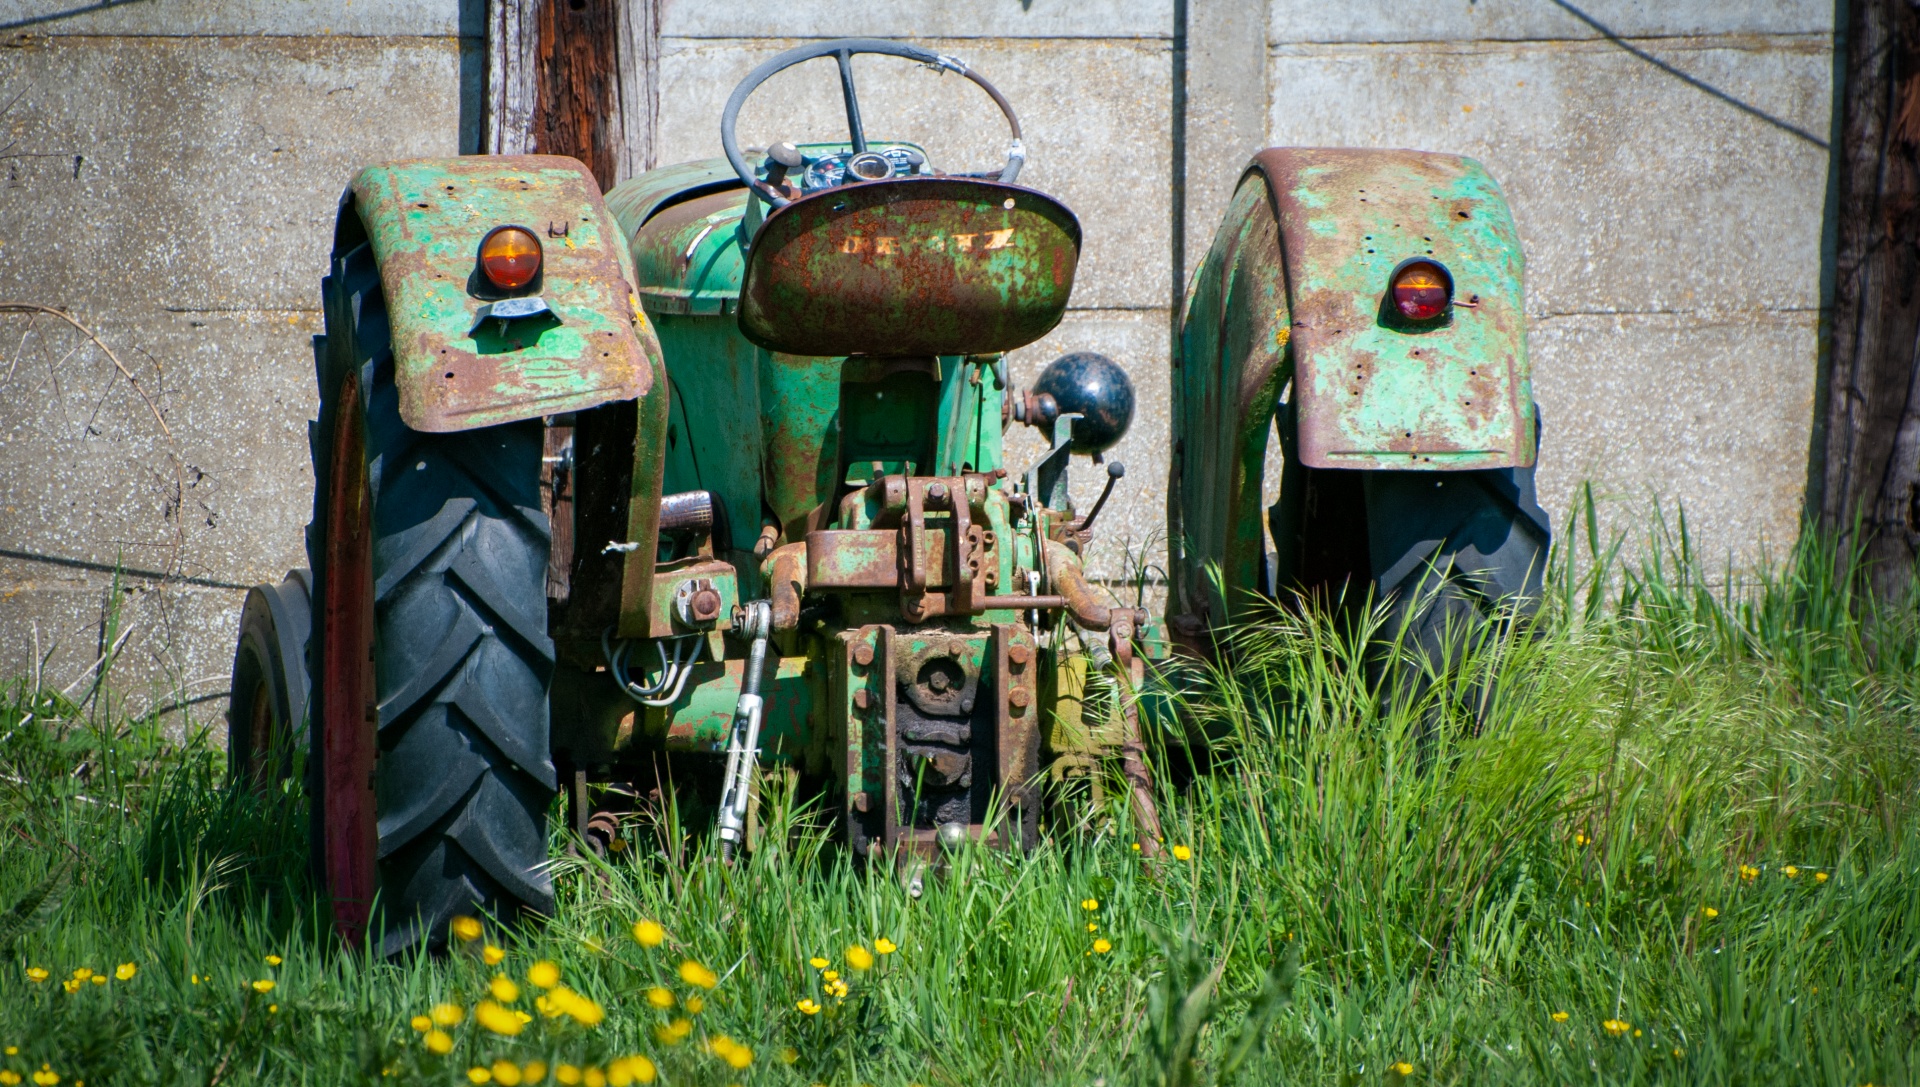 Old abandoned tractor